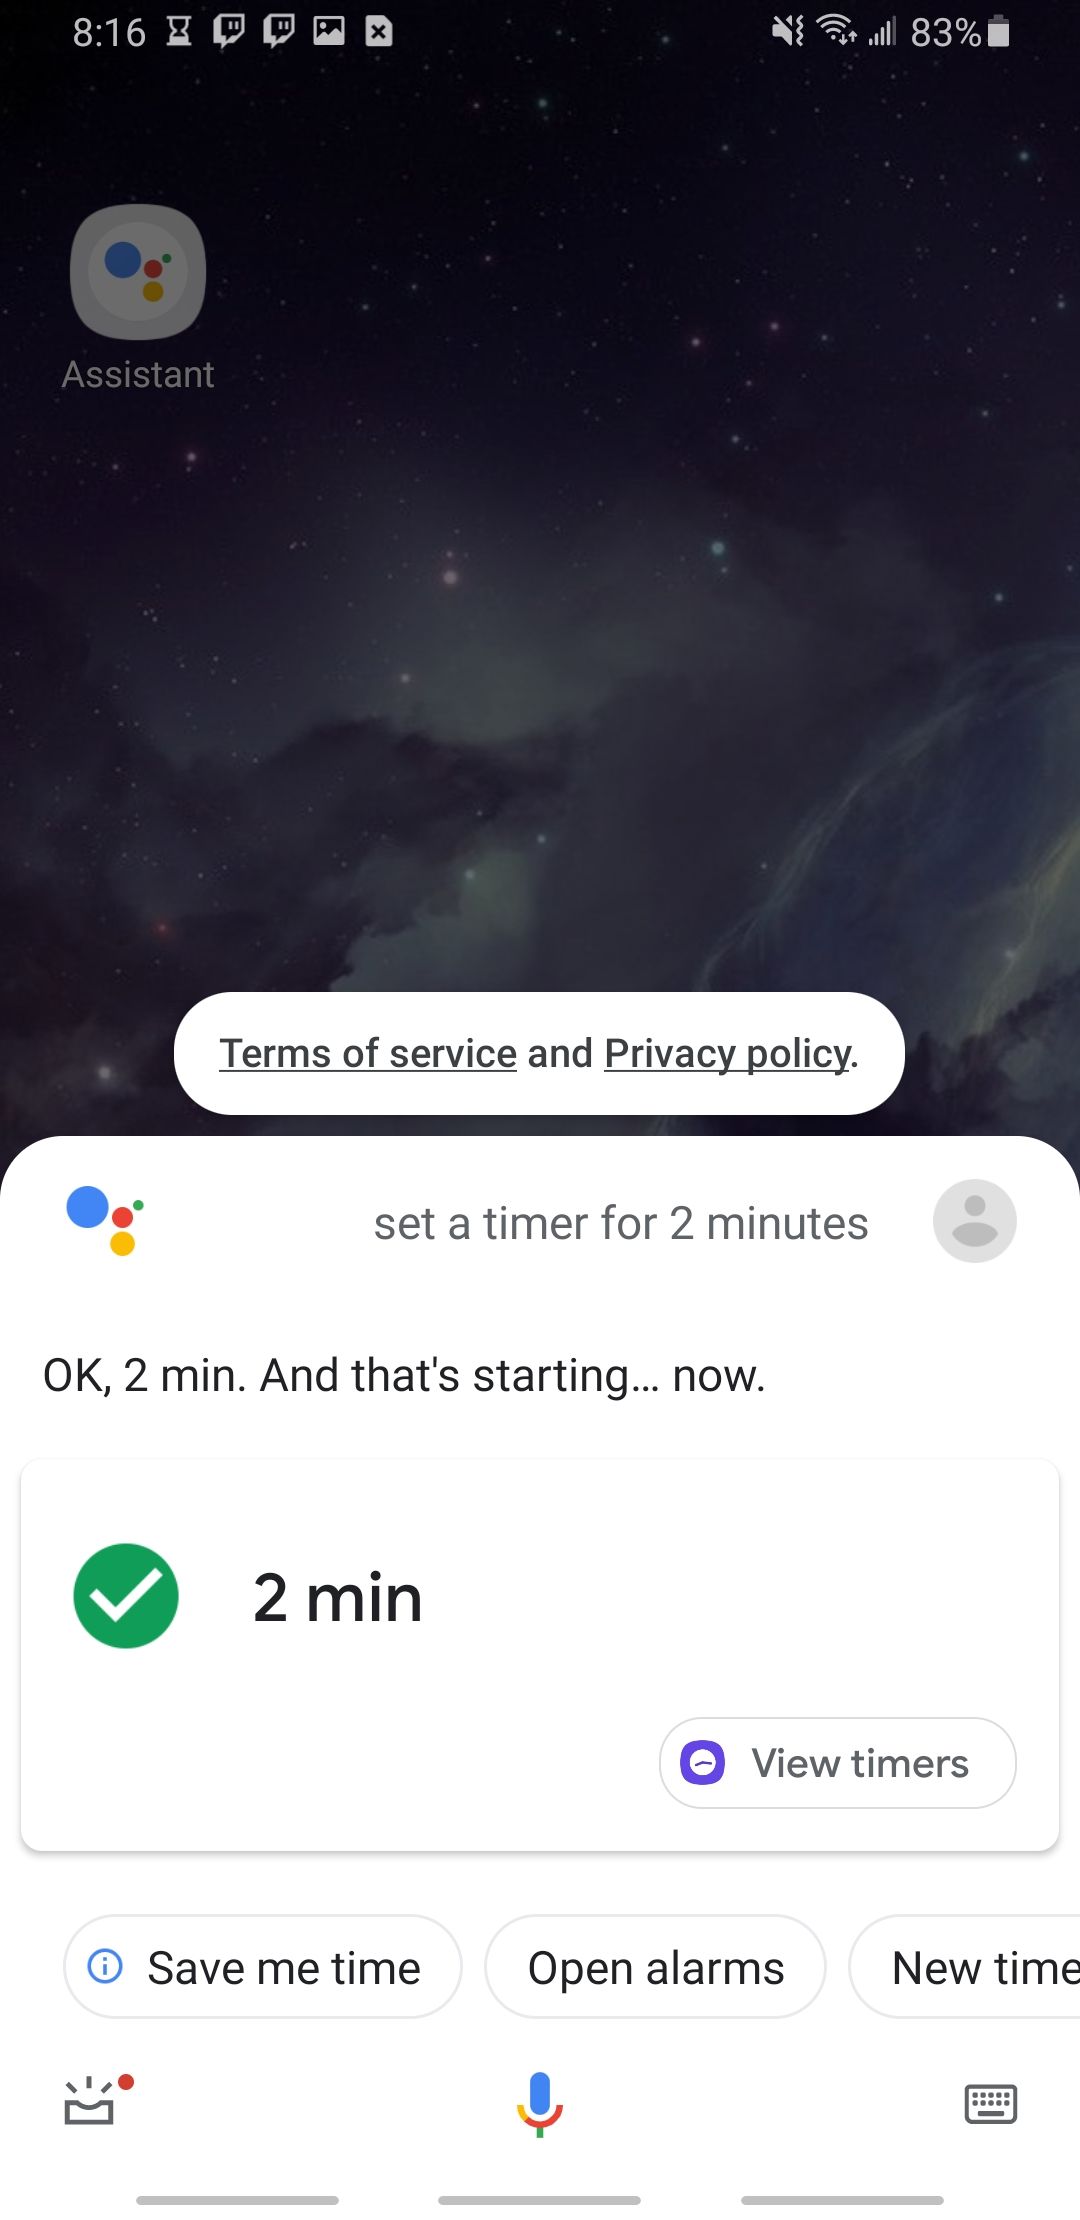 google assistant app setting a timer for two minutes